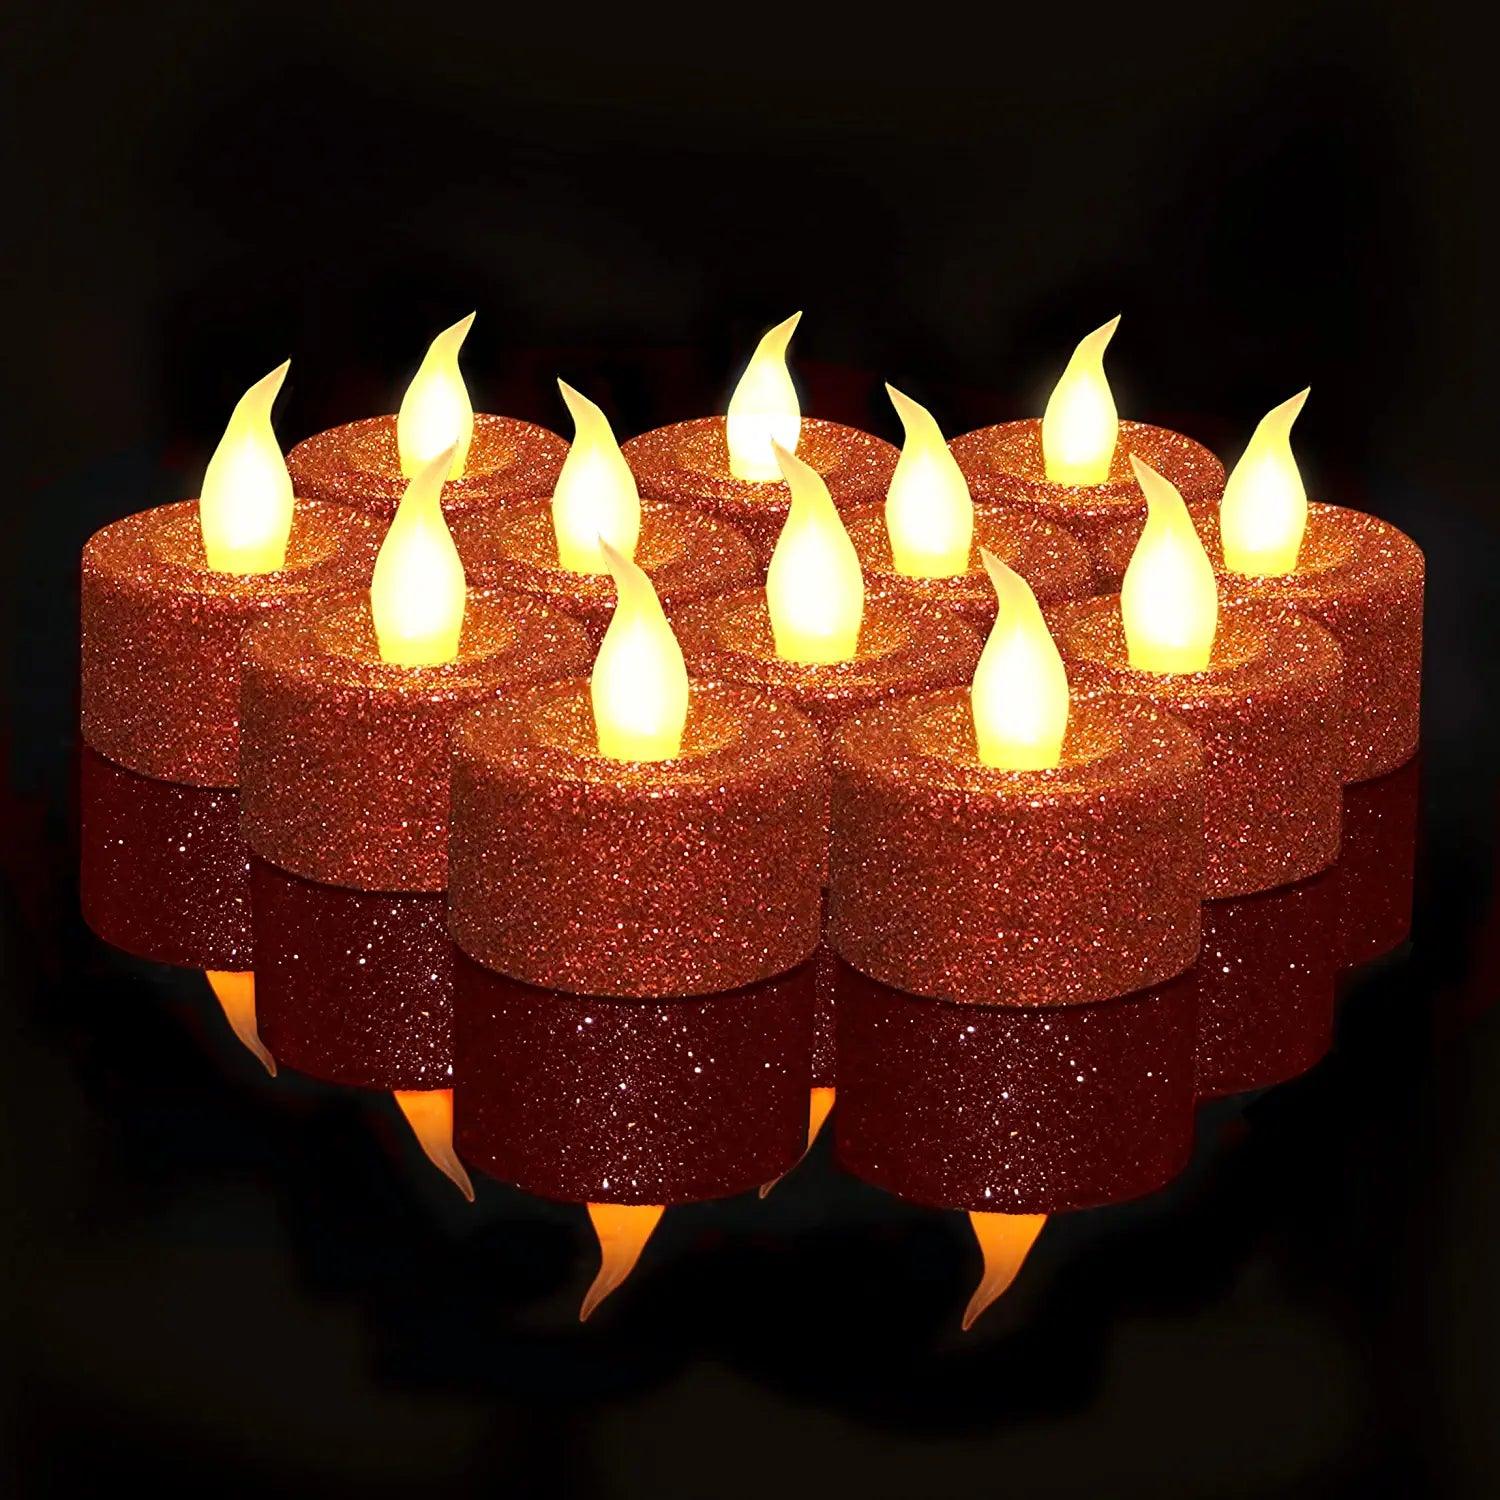 12pcs LED Glittery Candles Battery Operated Tea Lights with Built-In 6/18 Timer for Parties - Decotree.co Online Shop